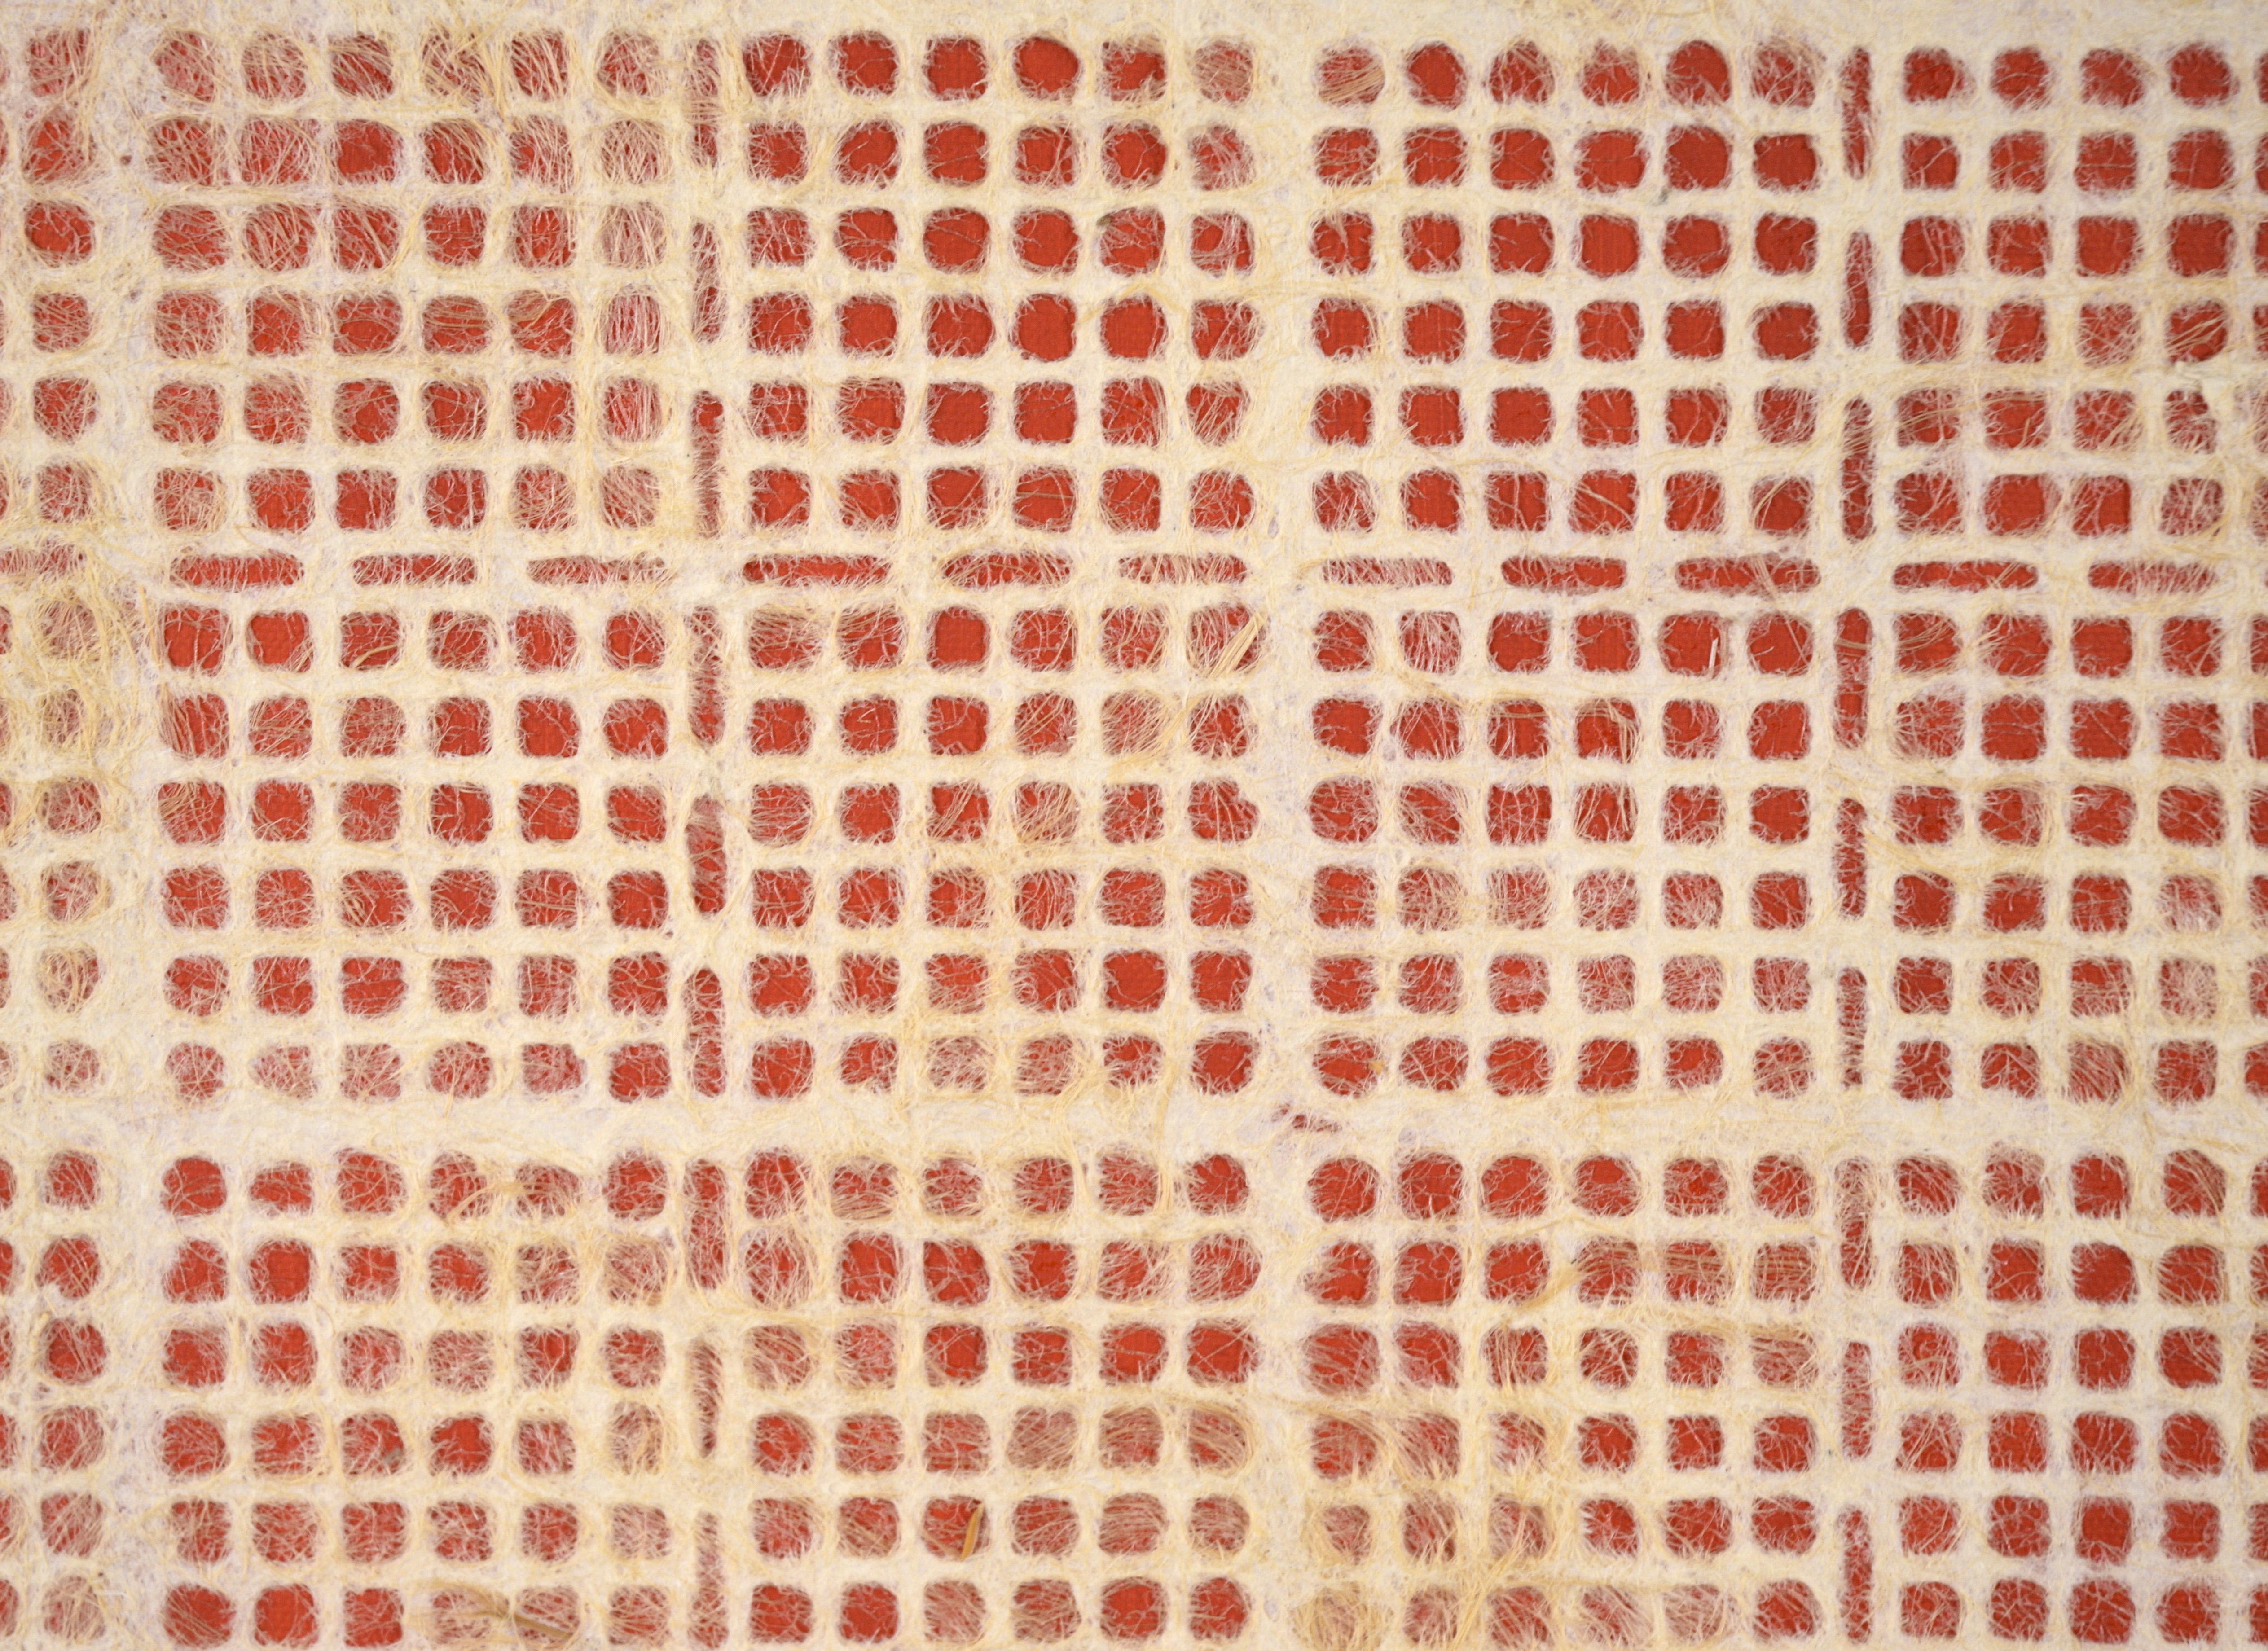 Abstract Geometric Composition with Handmade Paper, Fibers and Acrylic on Canvas (Red)

Whimsical abstract composition by an unknown artist (20th Century). Red acrylic paint makes up the background of this composition. Atop that, there is a layer of